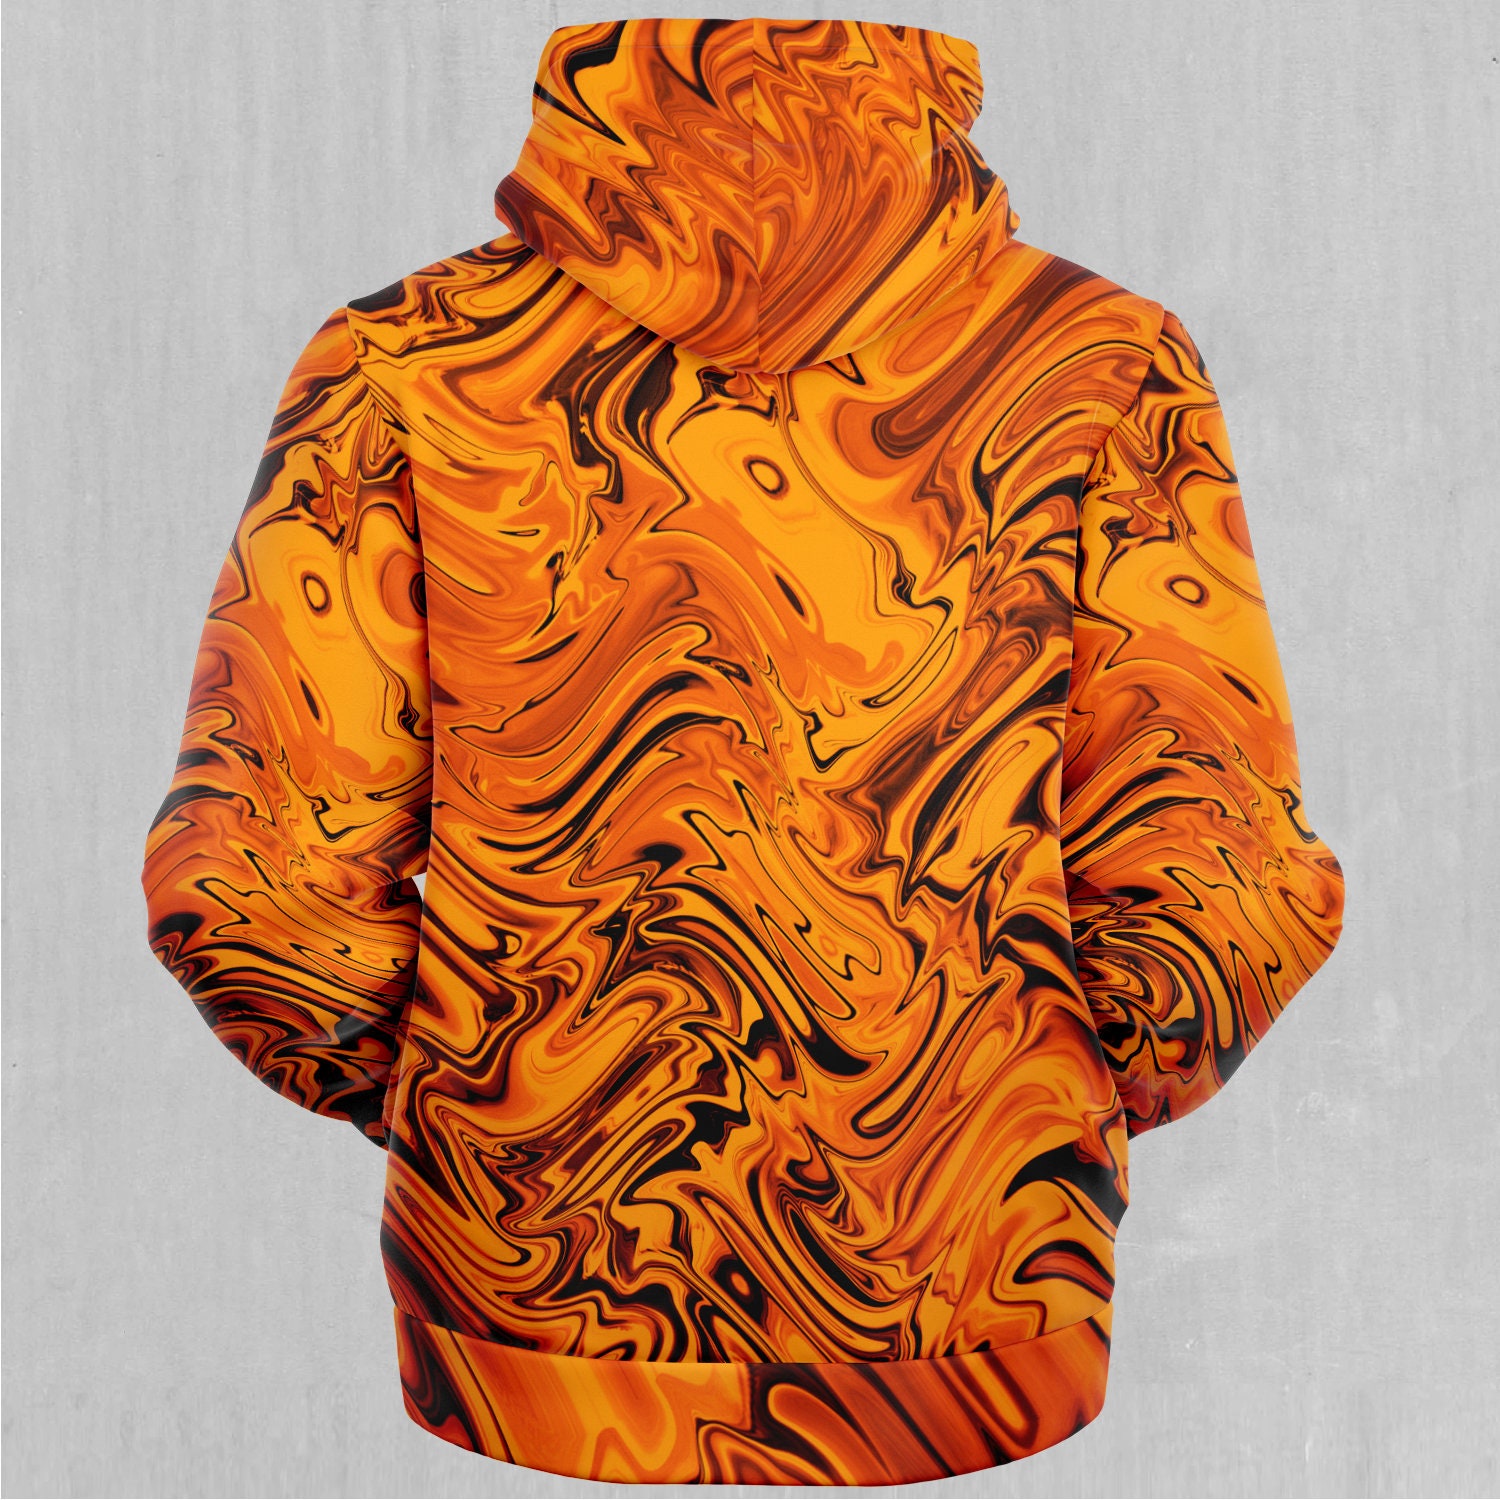 Discover Lava Flow Orange Psychedelic Abstract Sherpa Microfleece Zip-Up Hoodie